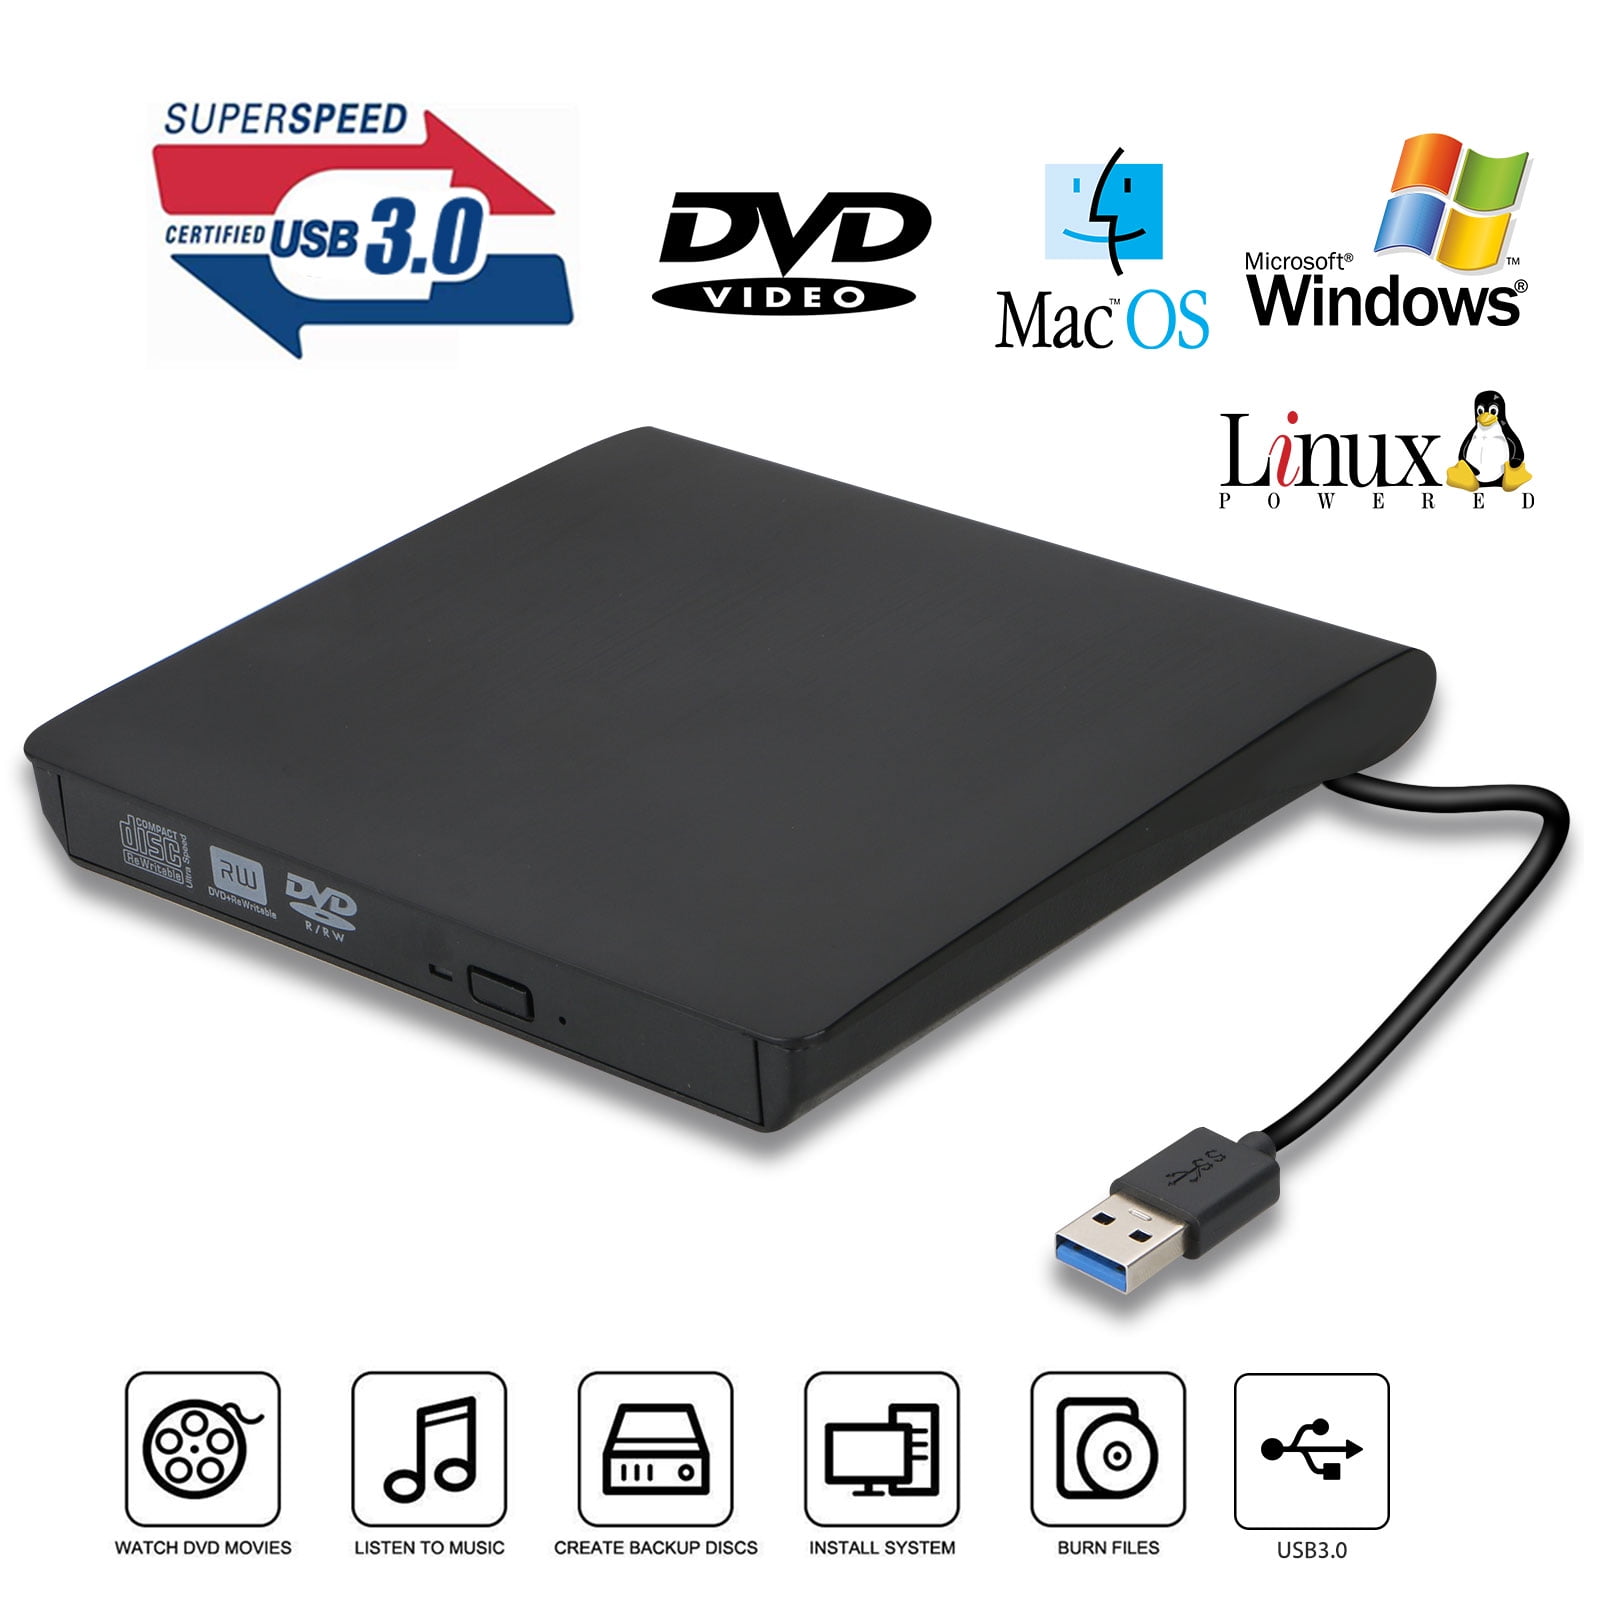 Portable Slim External USB 2.0 DVD/CD Writer Drive Reader Player For Laptop PC Ship from UK